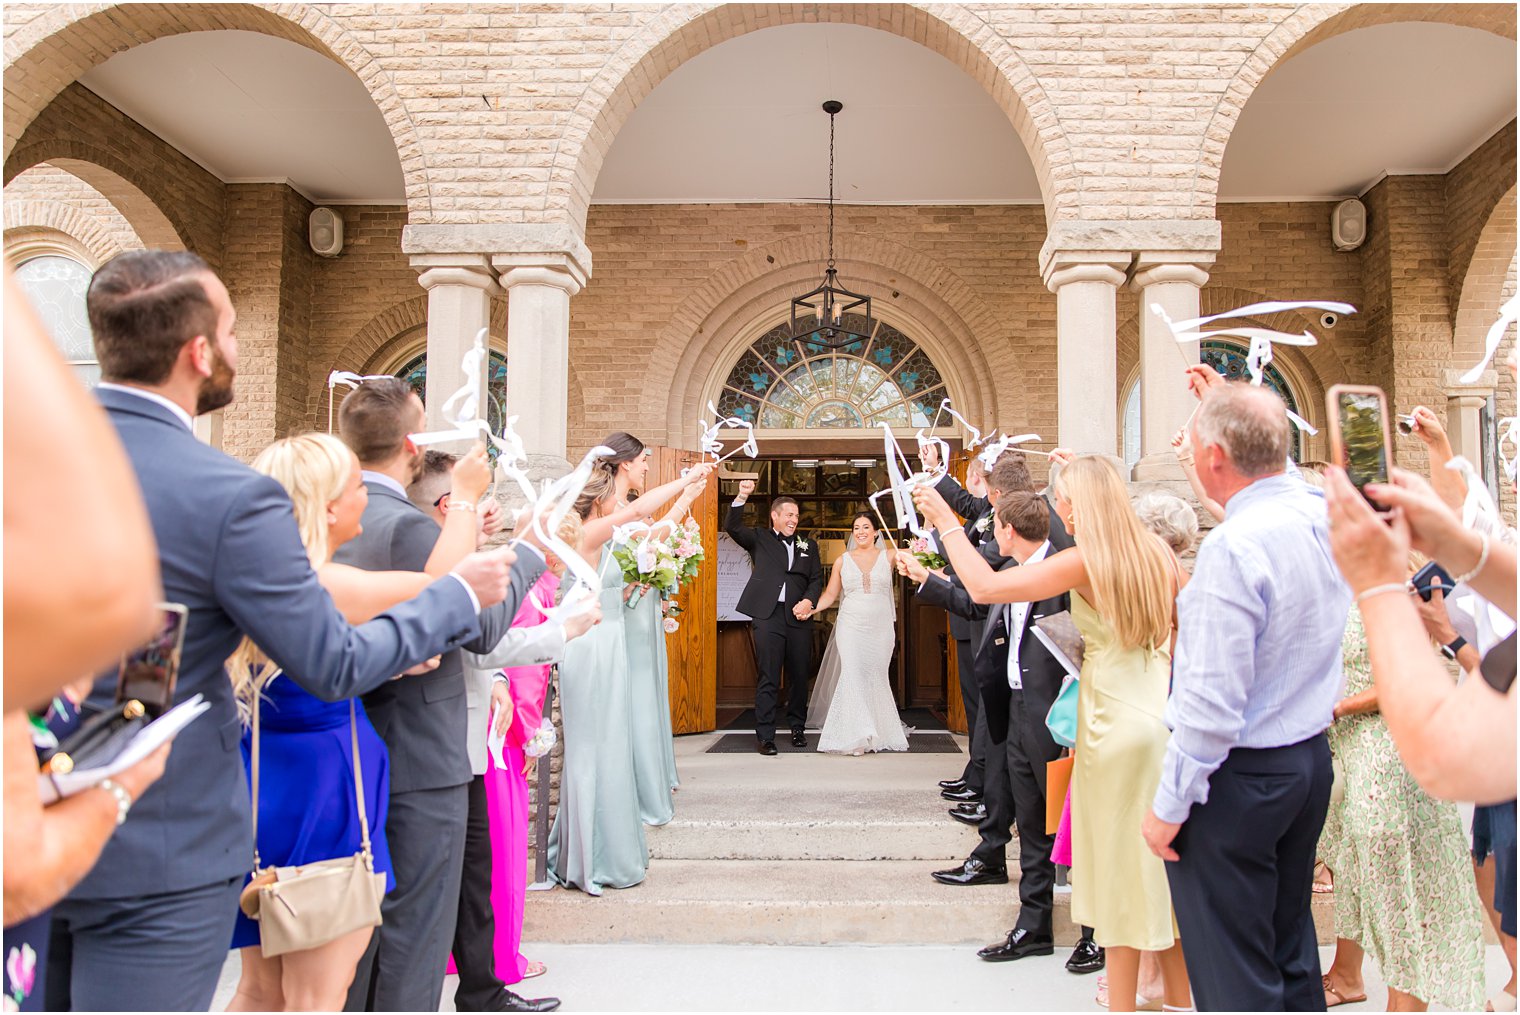 guests wave ribbons for newlyweds after traditional wedding ceremony at St. James church